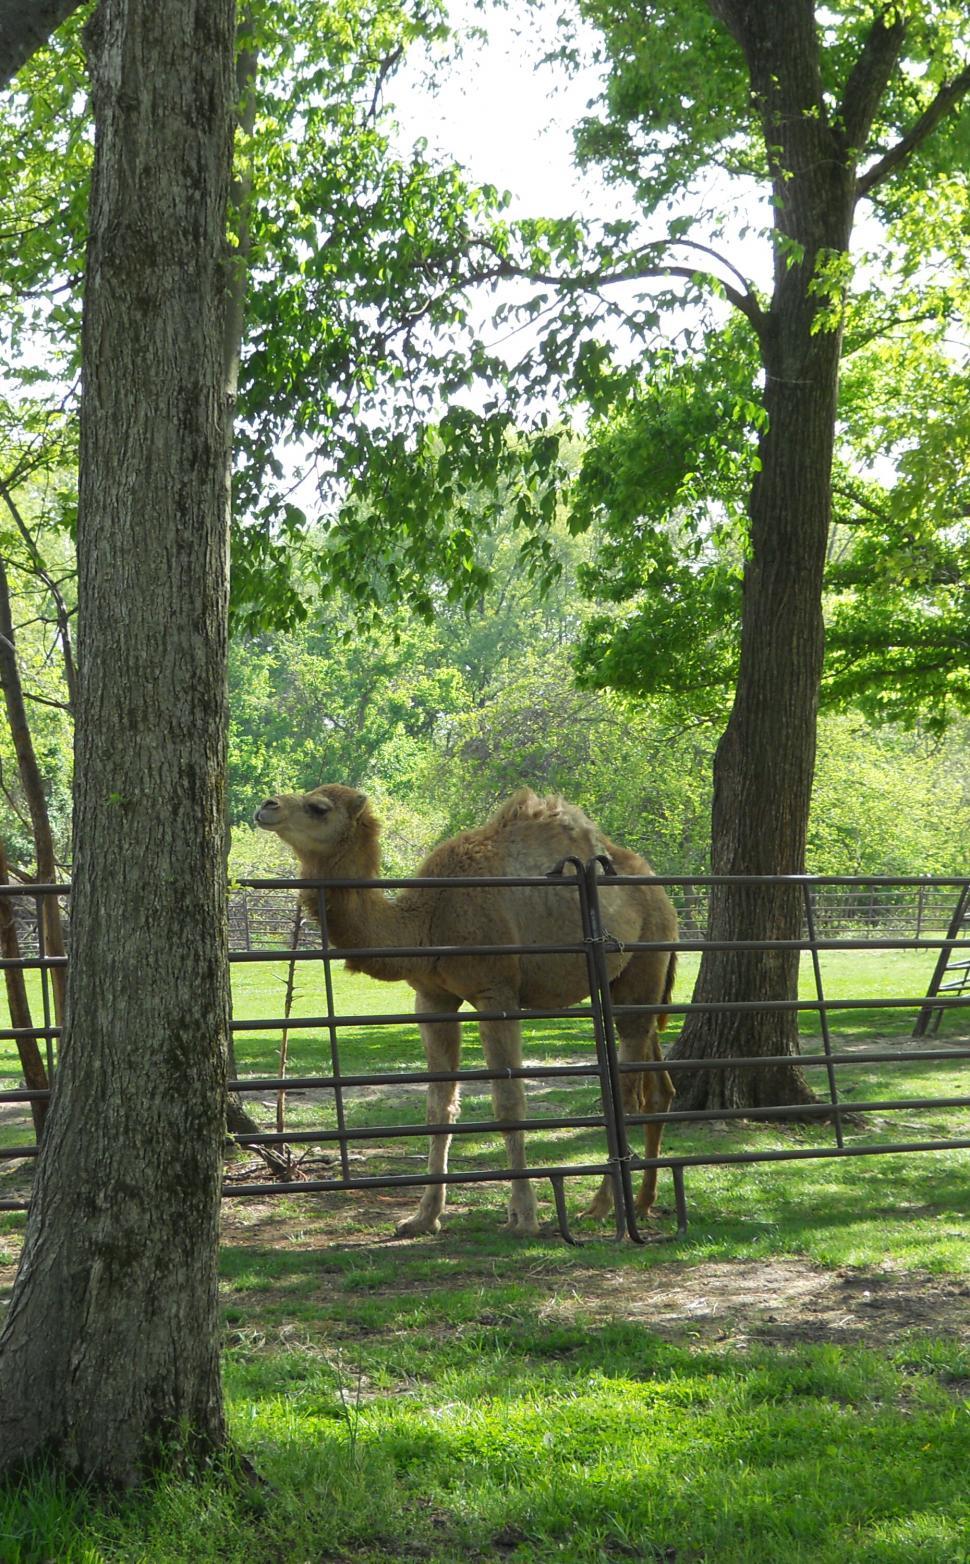 Free Image of Two Camels in a Fenced Area Surrounded by Trees 